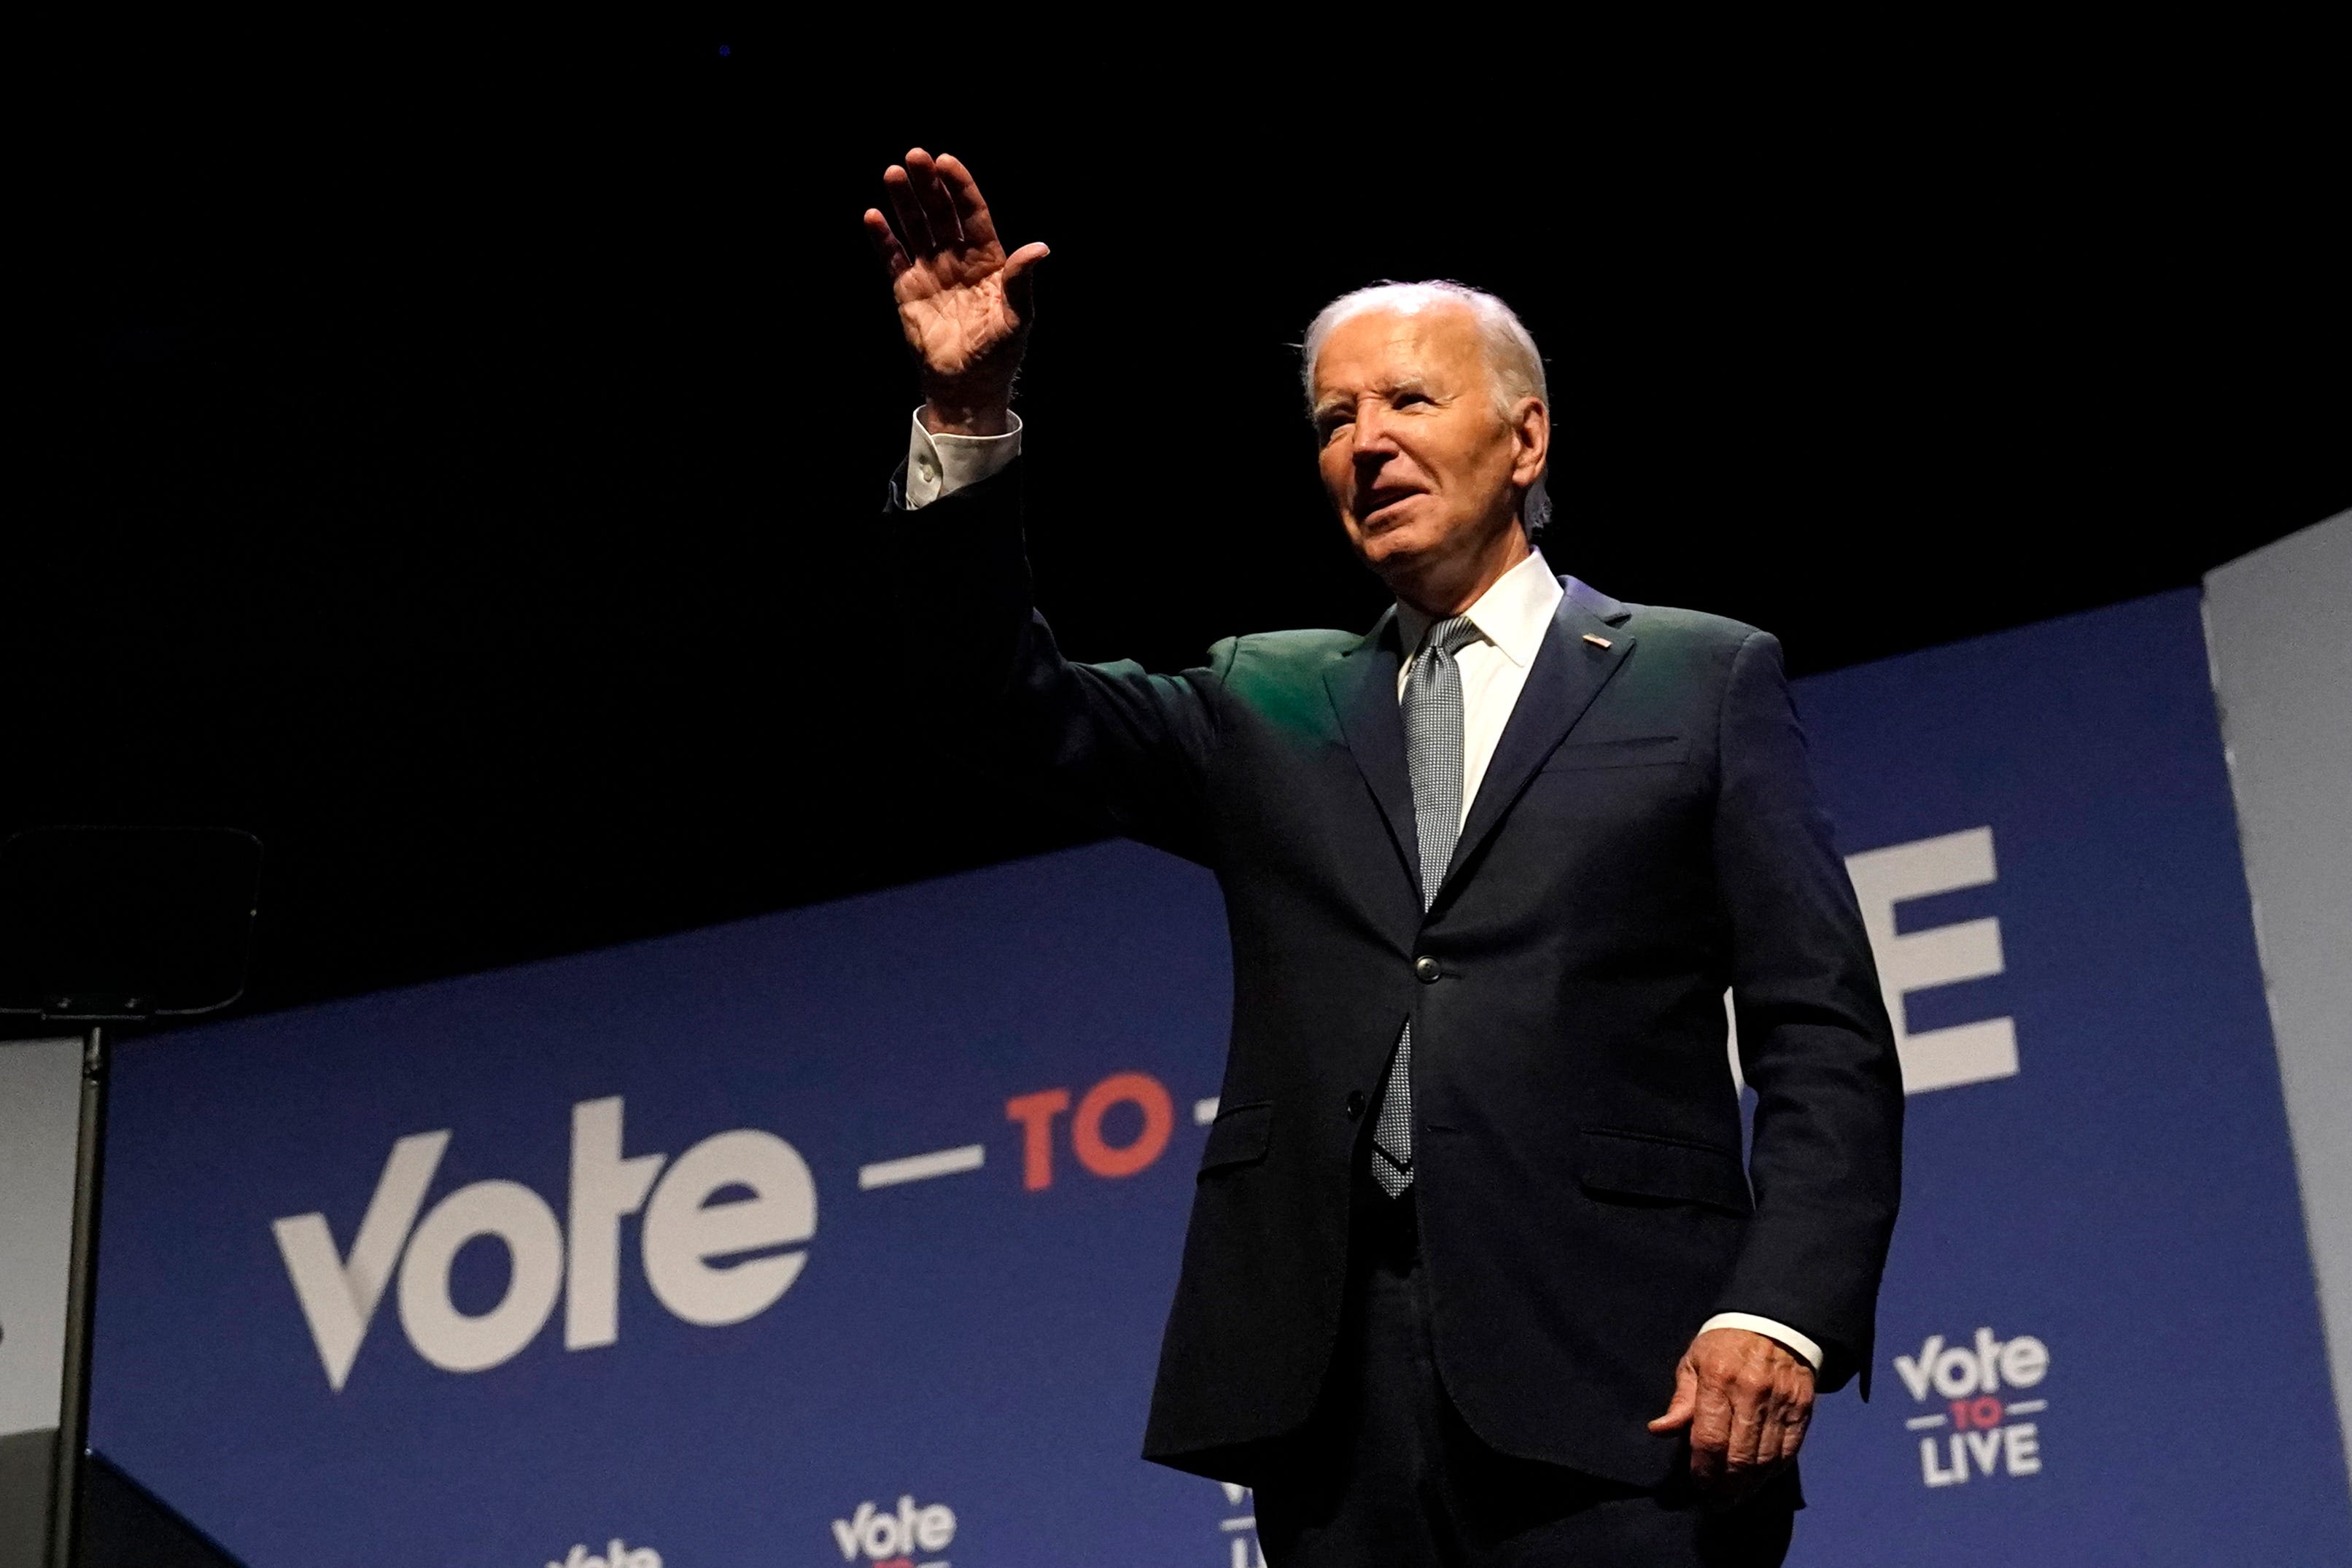 Democrats to hold off on early virtual nomination of President Biden amid party outcry